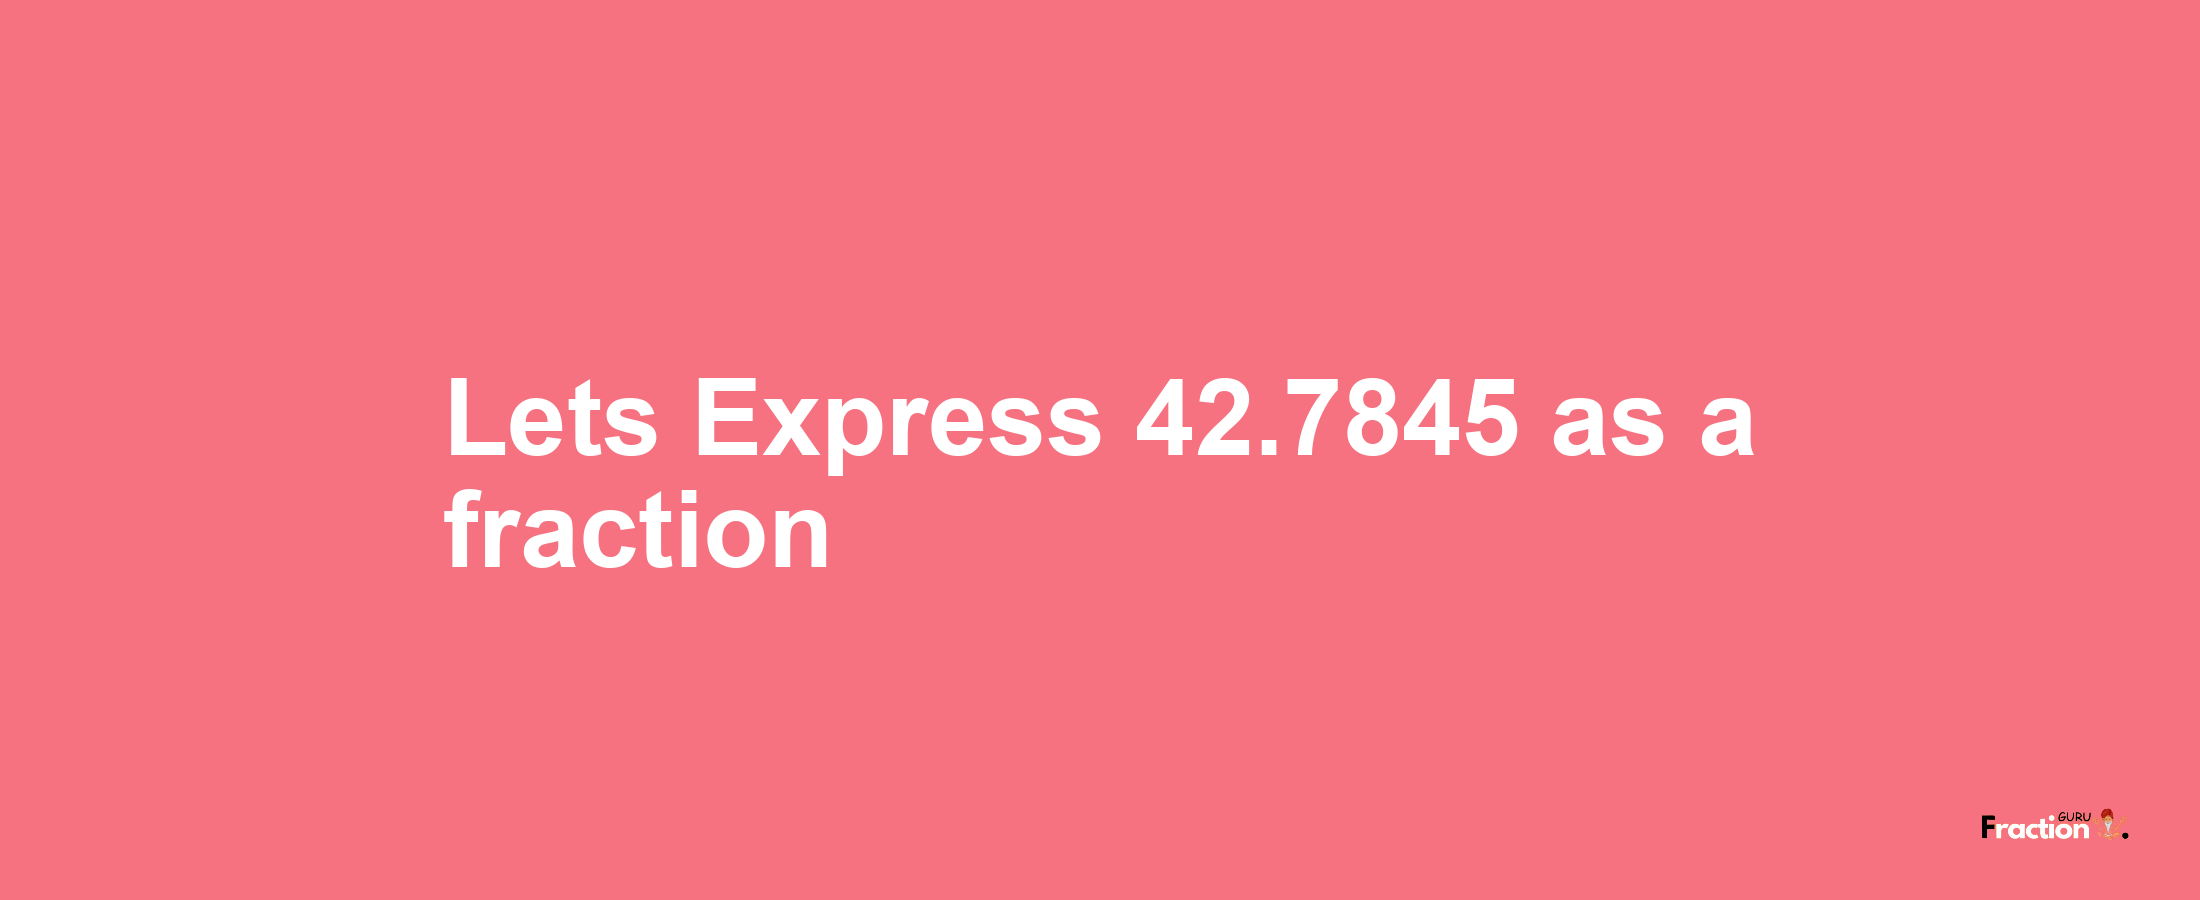 Lets Express 42.7845 as afraction